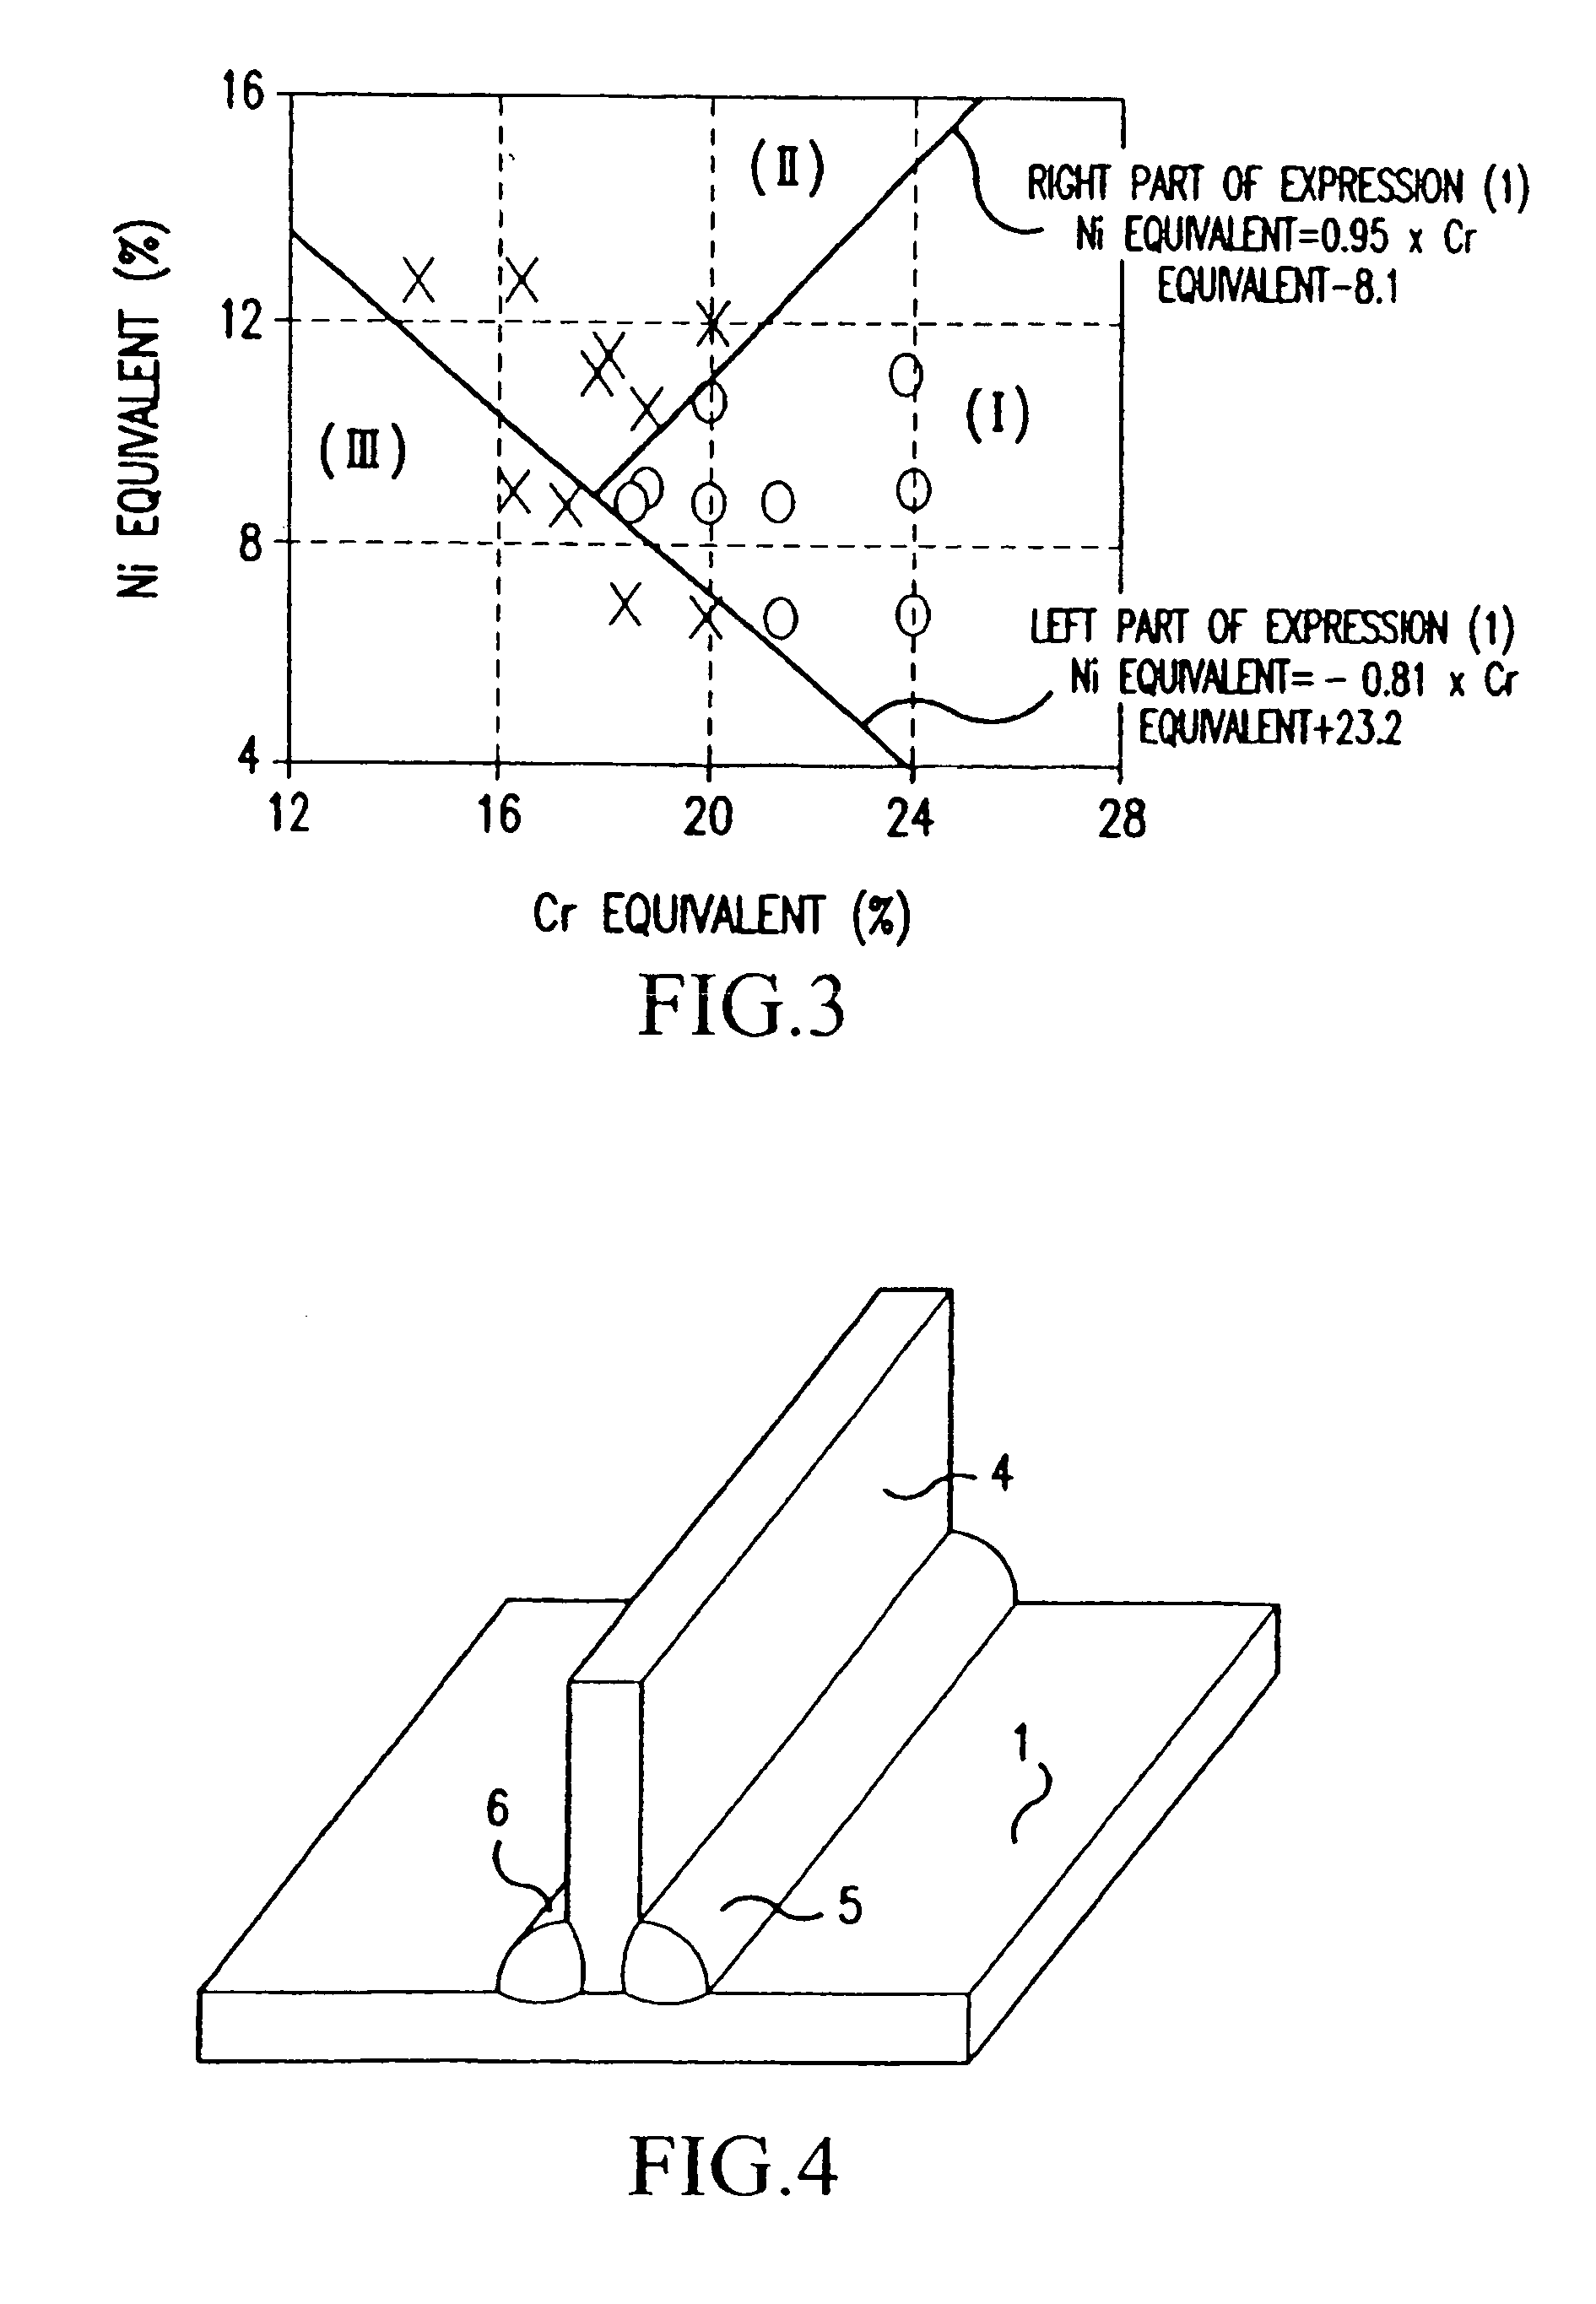 Weld joint formed with stainless steel-based weld metal for welding a zinc-based alloy coated steel sheet